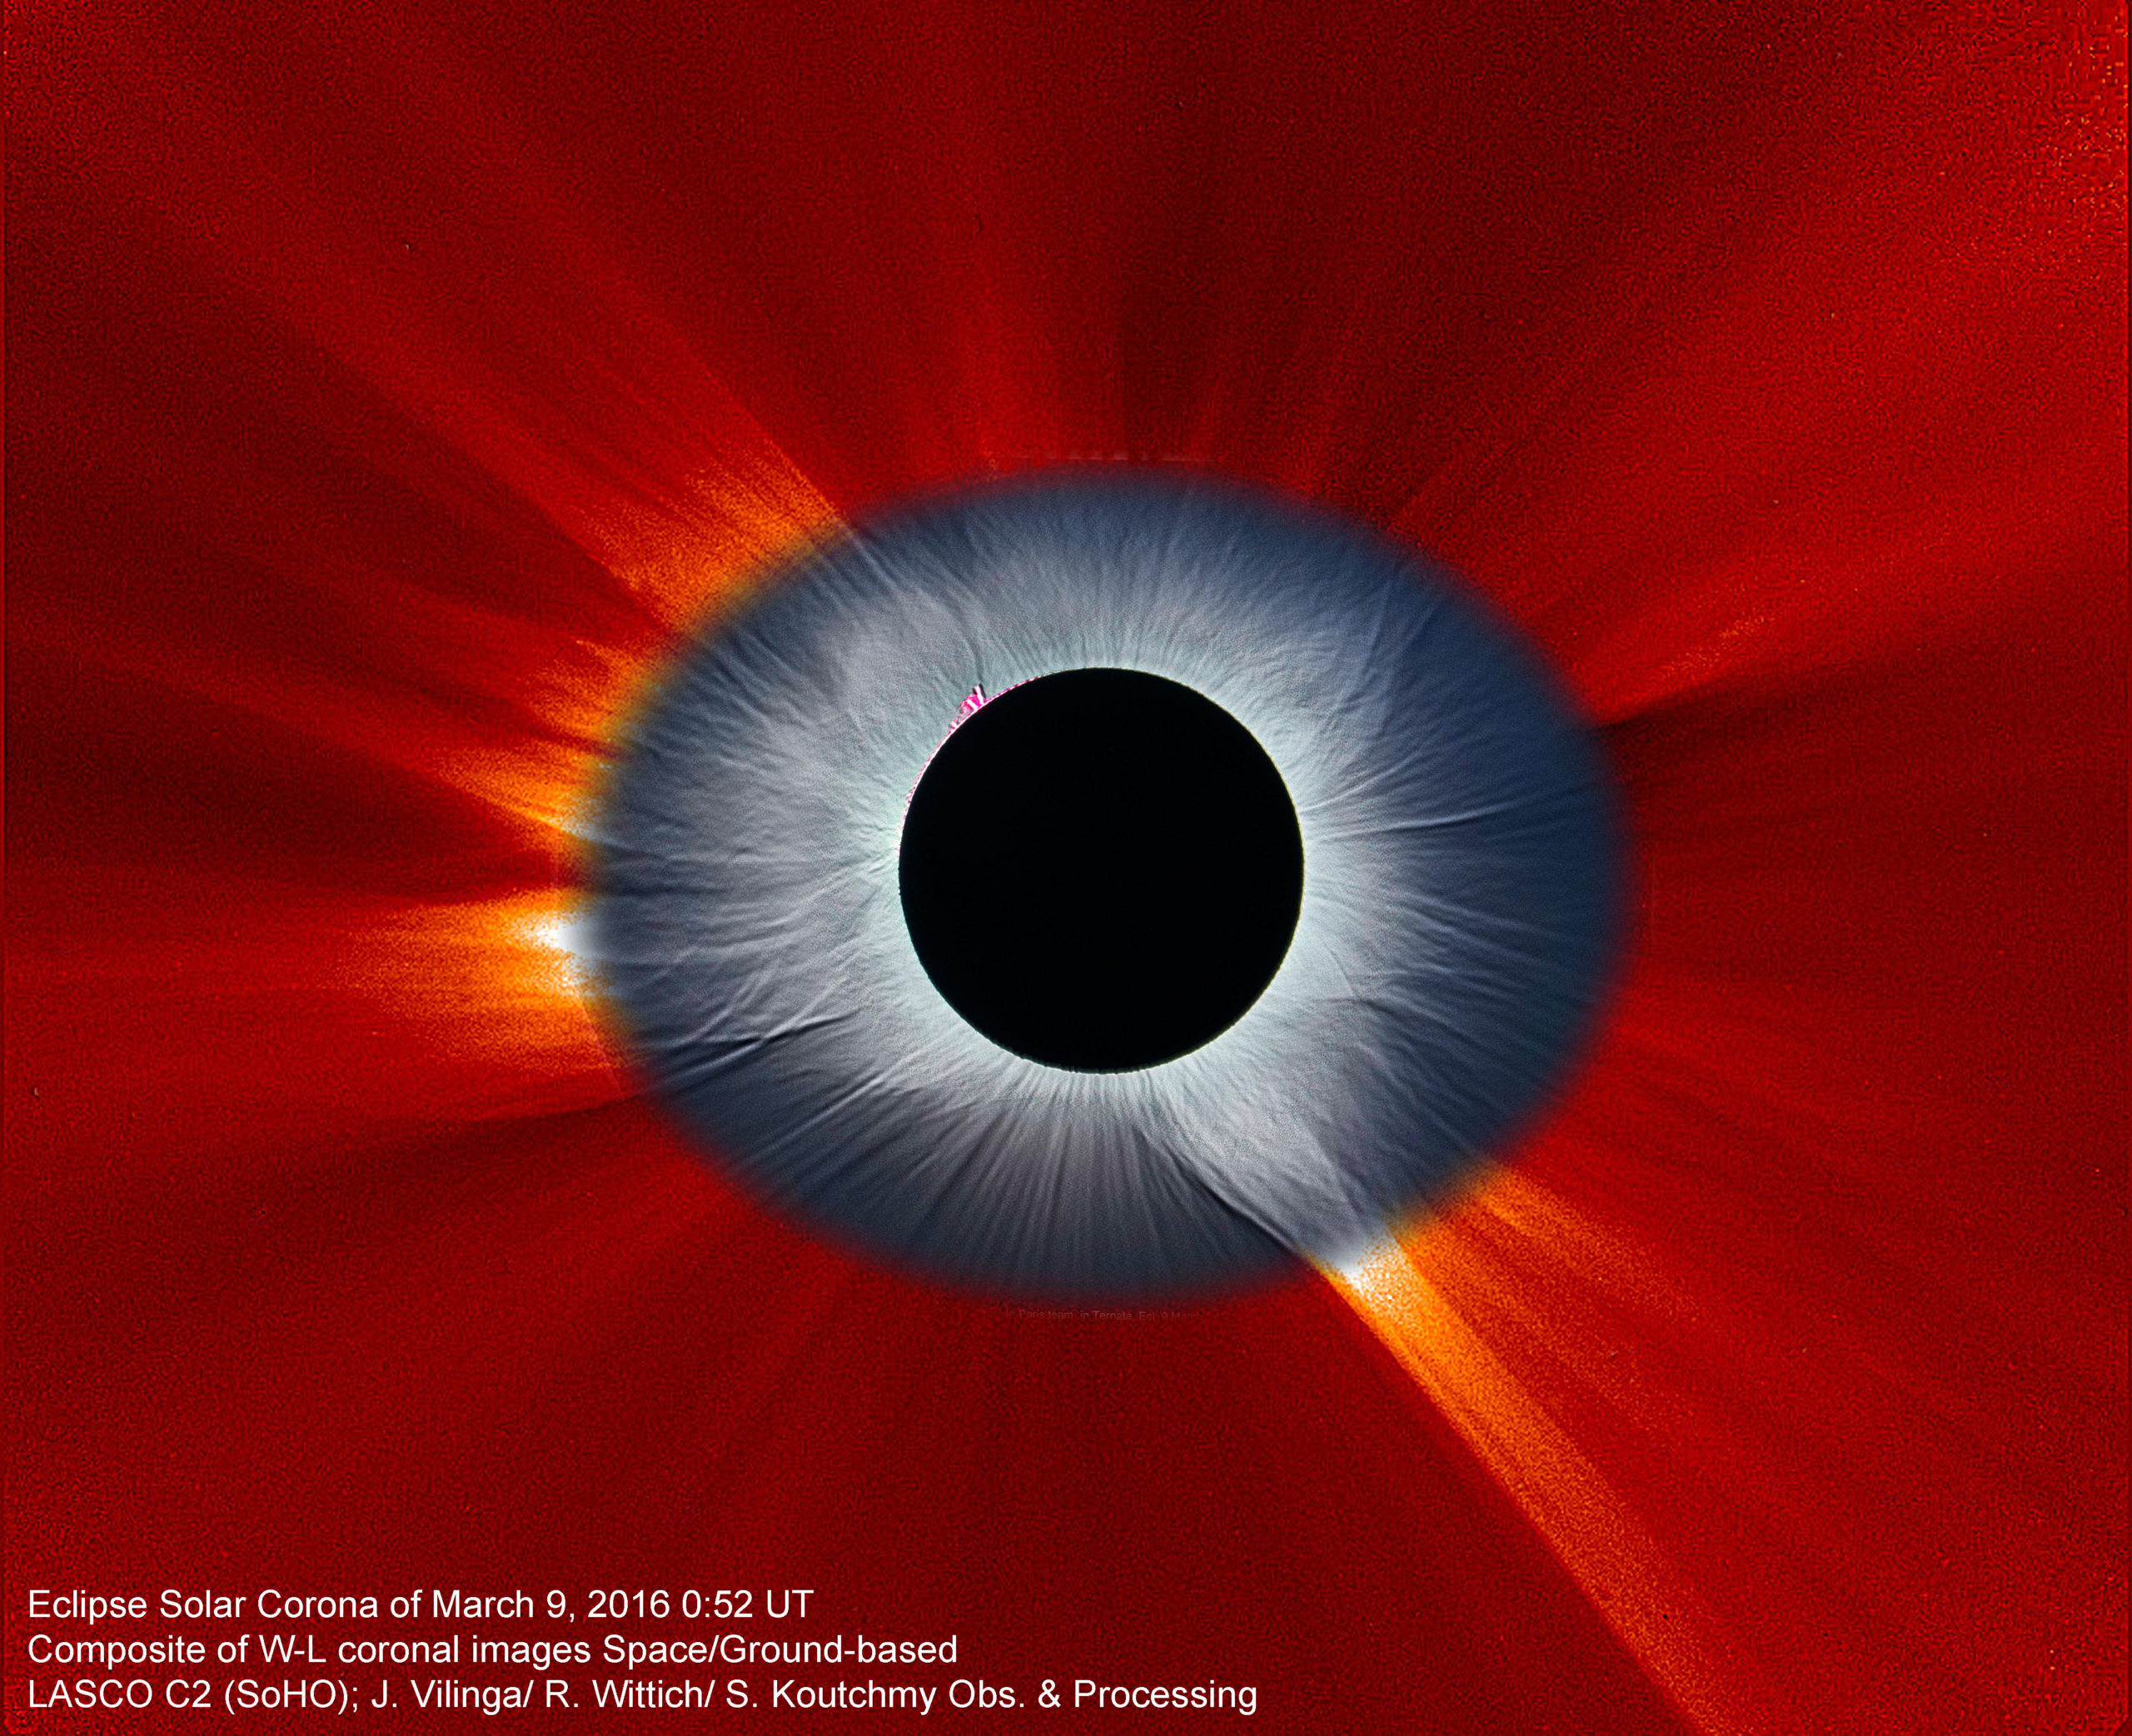 Stunning Solar Eclipse Image Looks Like The Eye Of Our Solar System